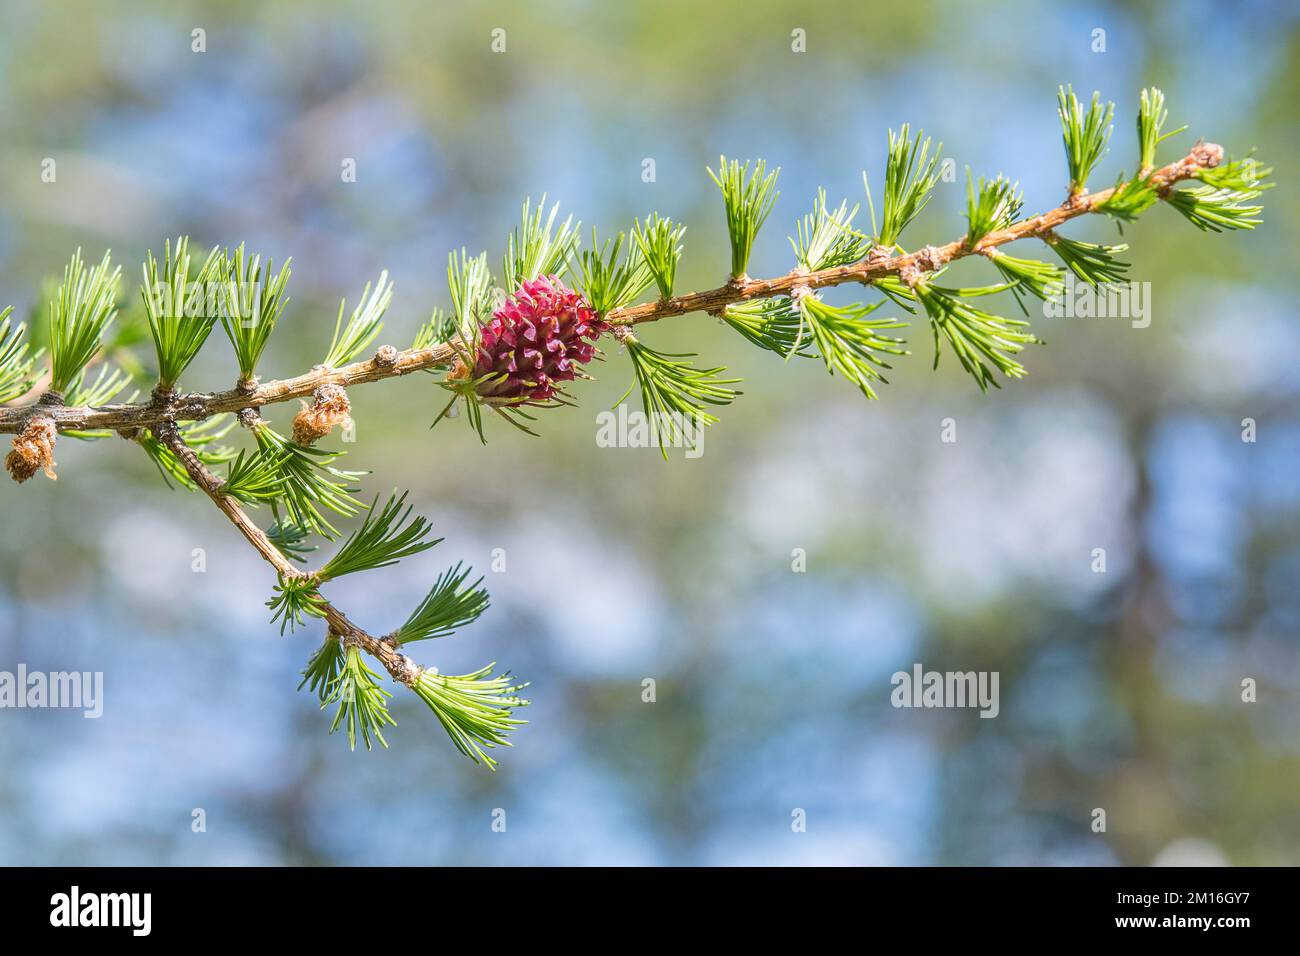 Larix decidua, the European larch, is a species of larch native to the mountains of central Europe, female and male flower. Stock Photo